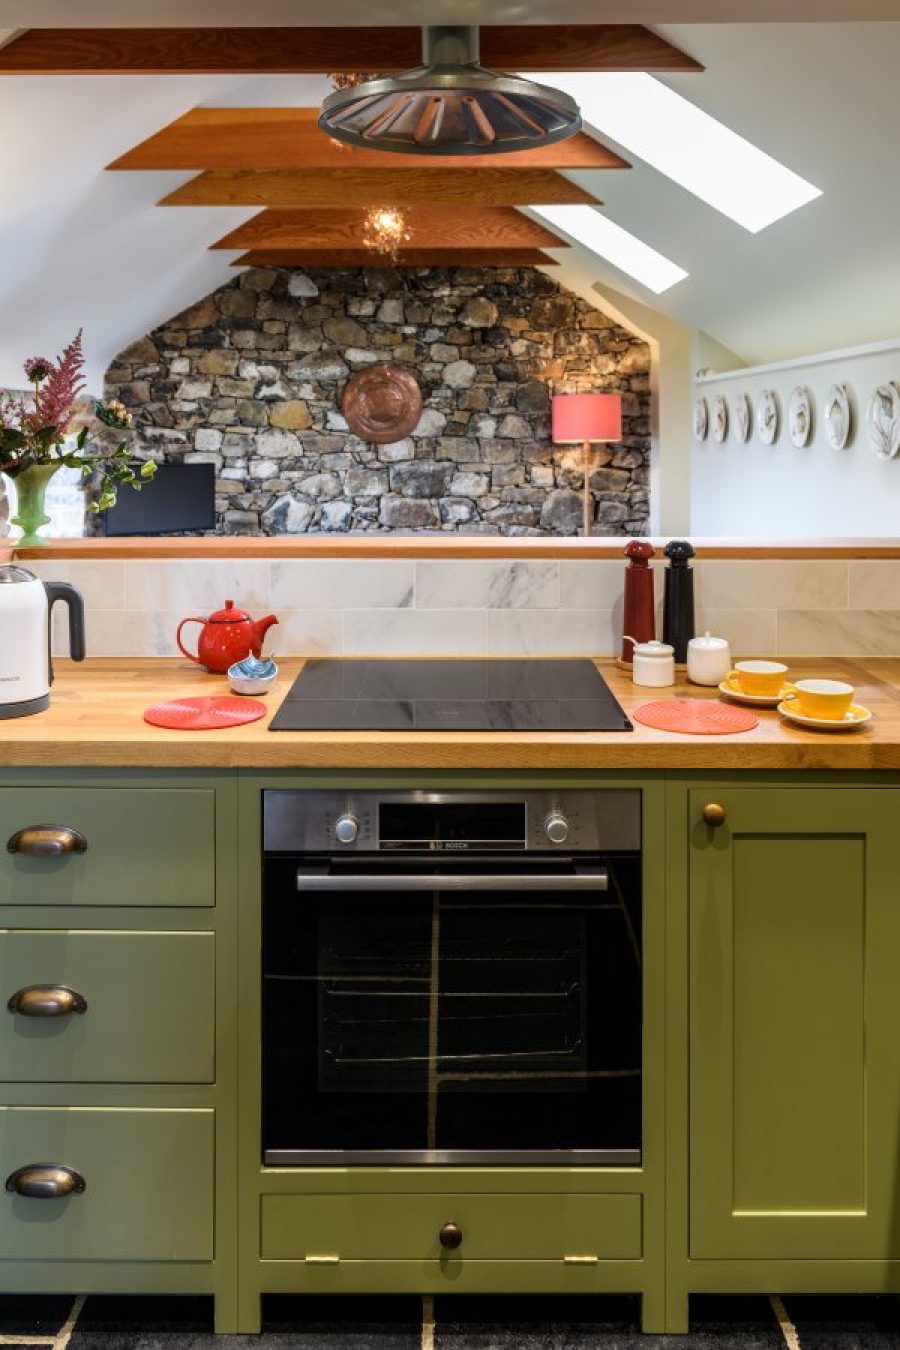 Blackhouse luxury cottage has an open plan dining area featuring a fully equipped deVol hand-crafted kitchen.